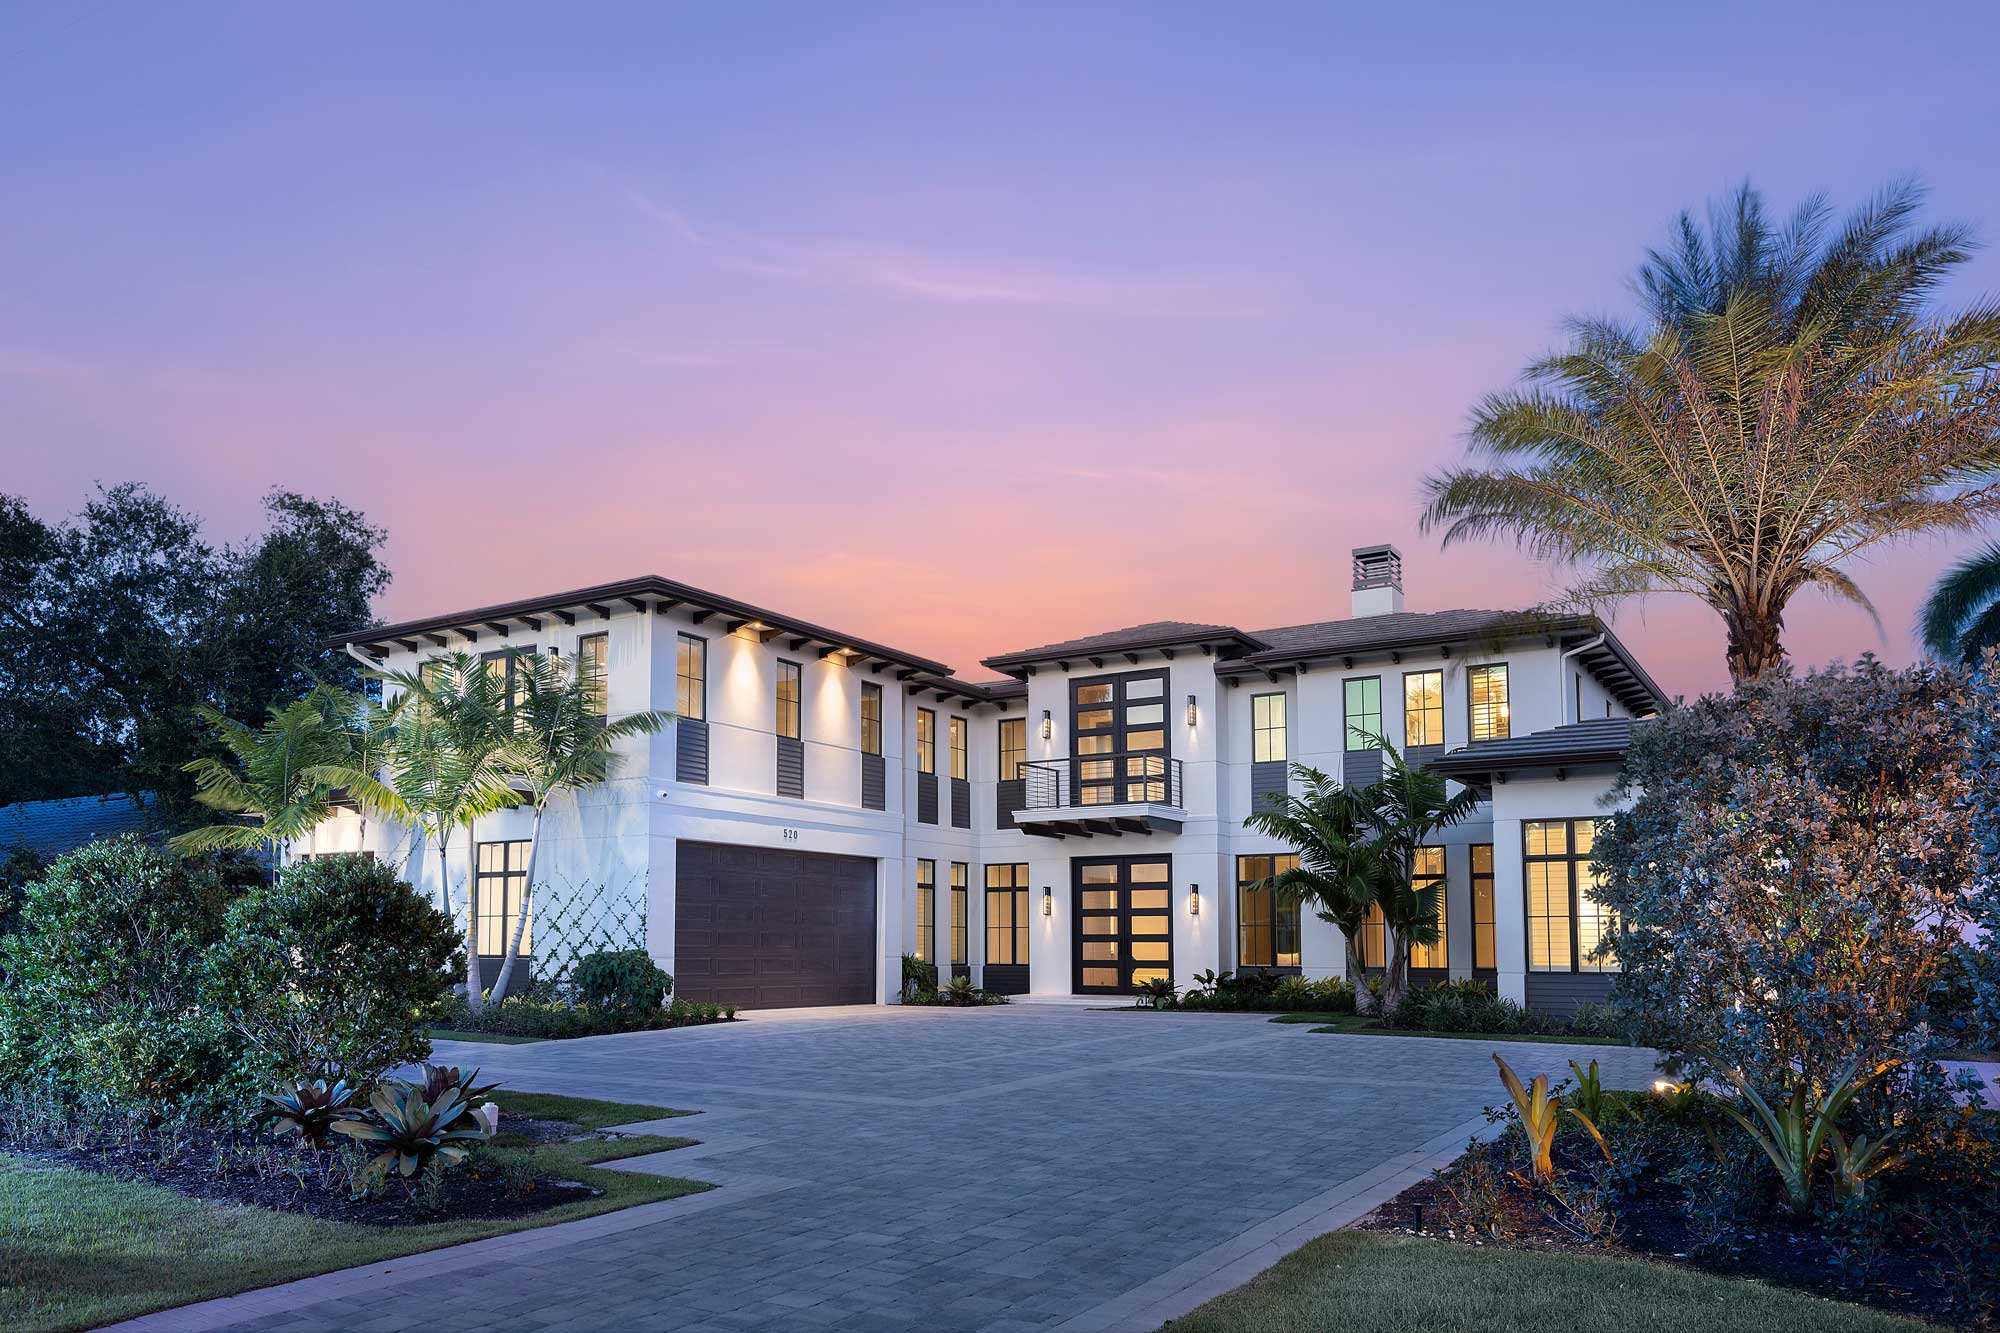 Exterior image of Diamond Custom Homes’ Mayfair residence on Yucca Road in Coquina Sands.